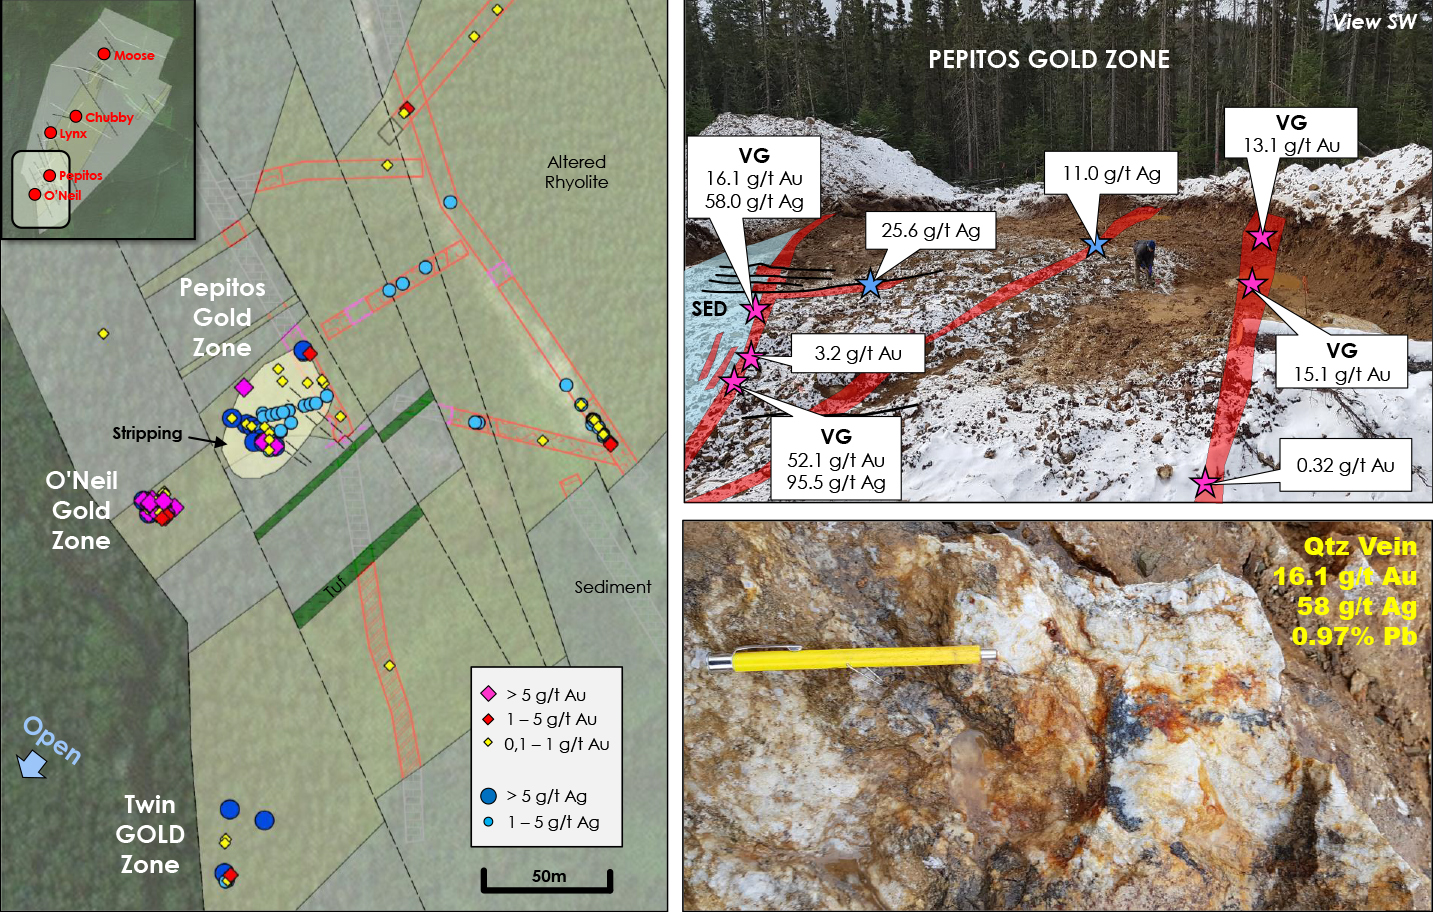 Figure 1: Pepitos Gold Zone Location and Highlights